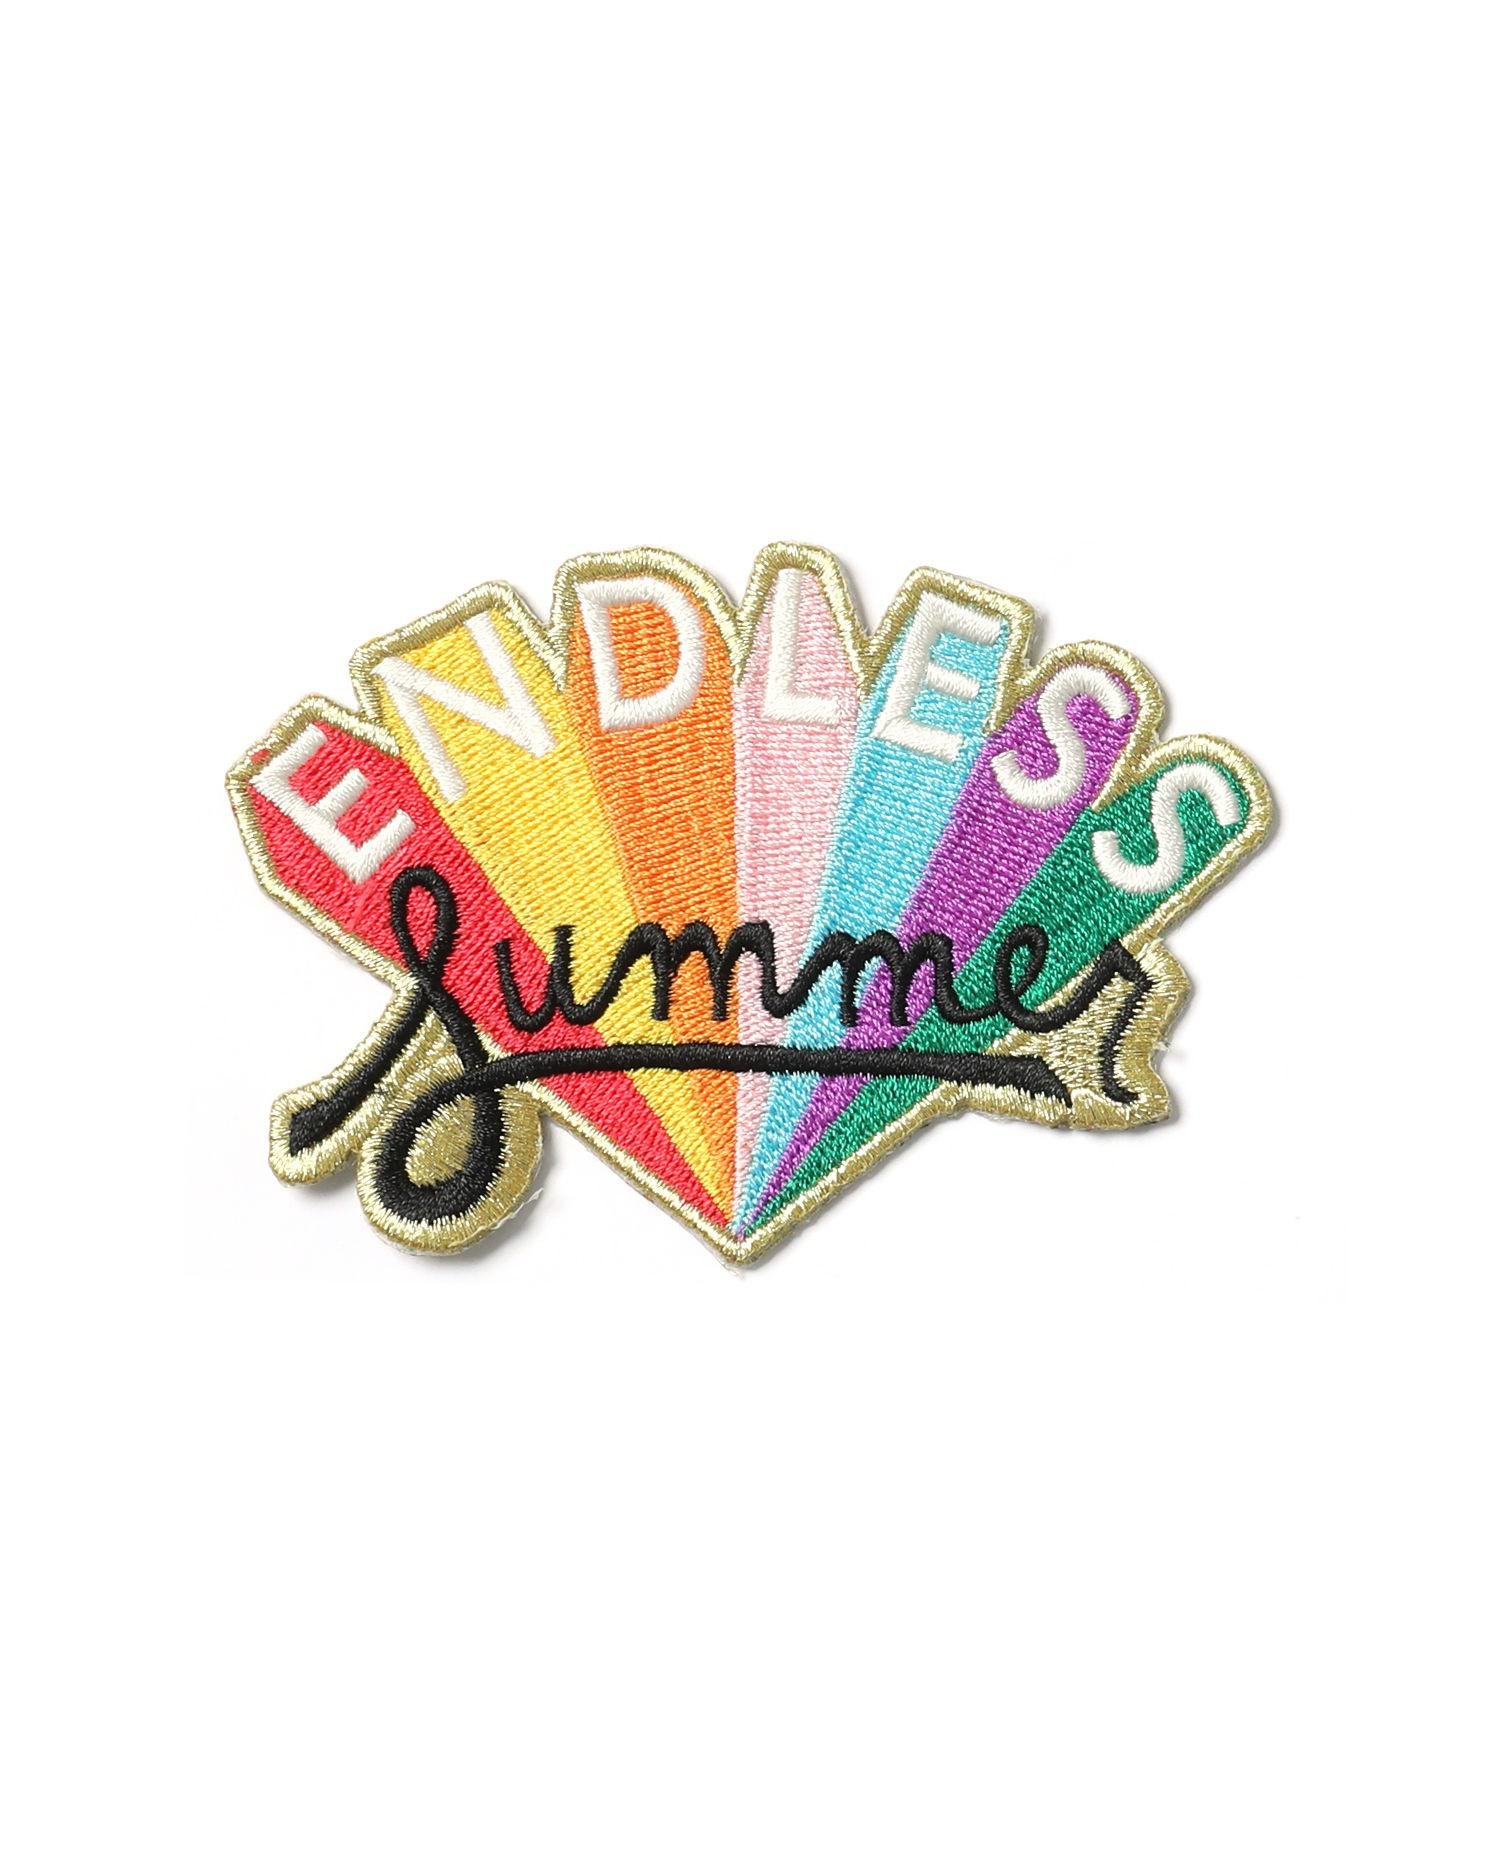 Endless Summer embroidery patch by BAN.DO